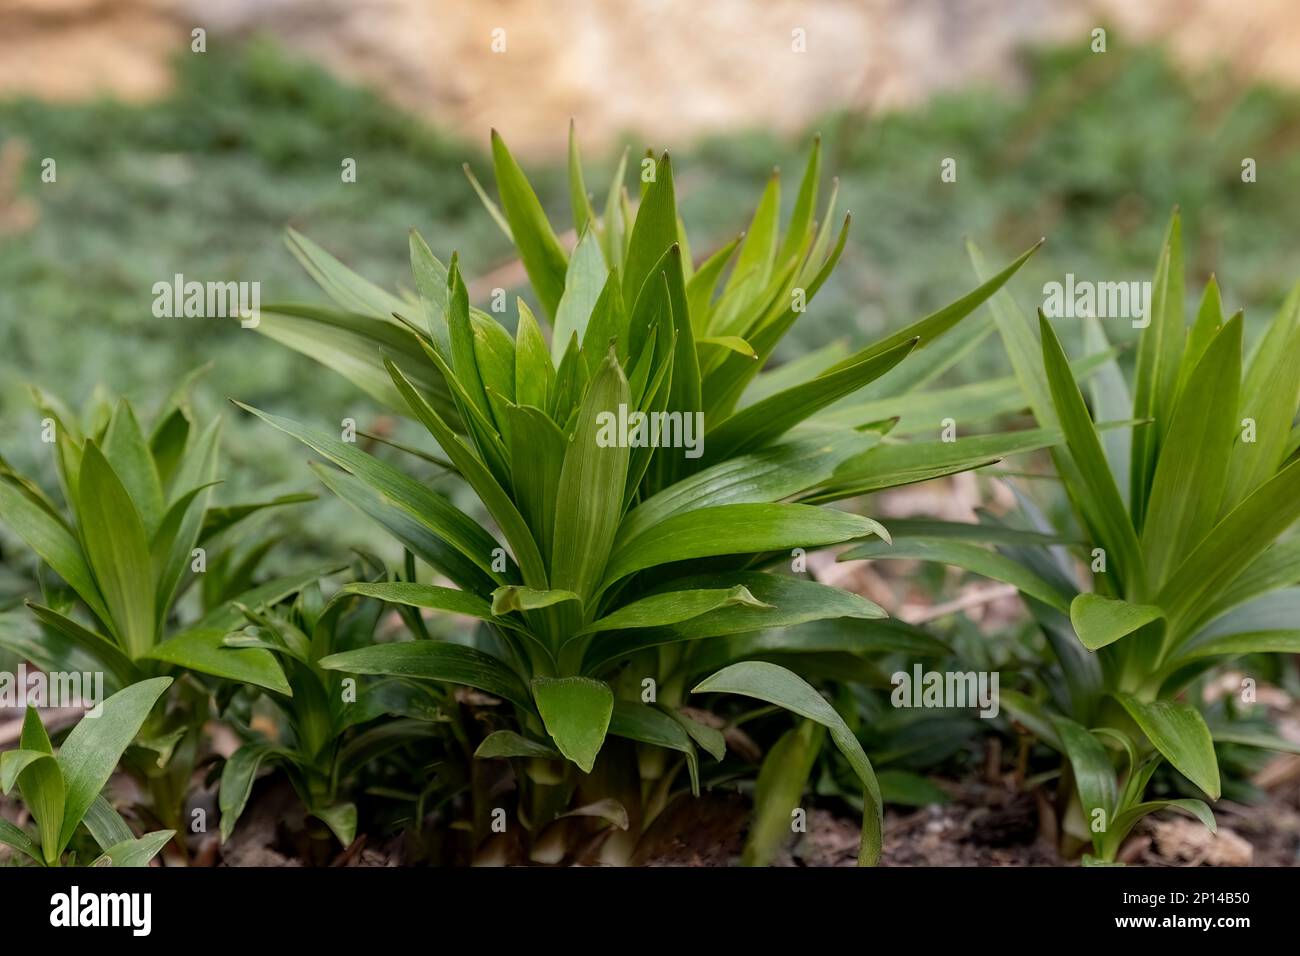 Asiatic lily or lilium bulbiferum green leaves in the garden design Stock Photo